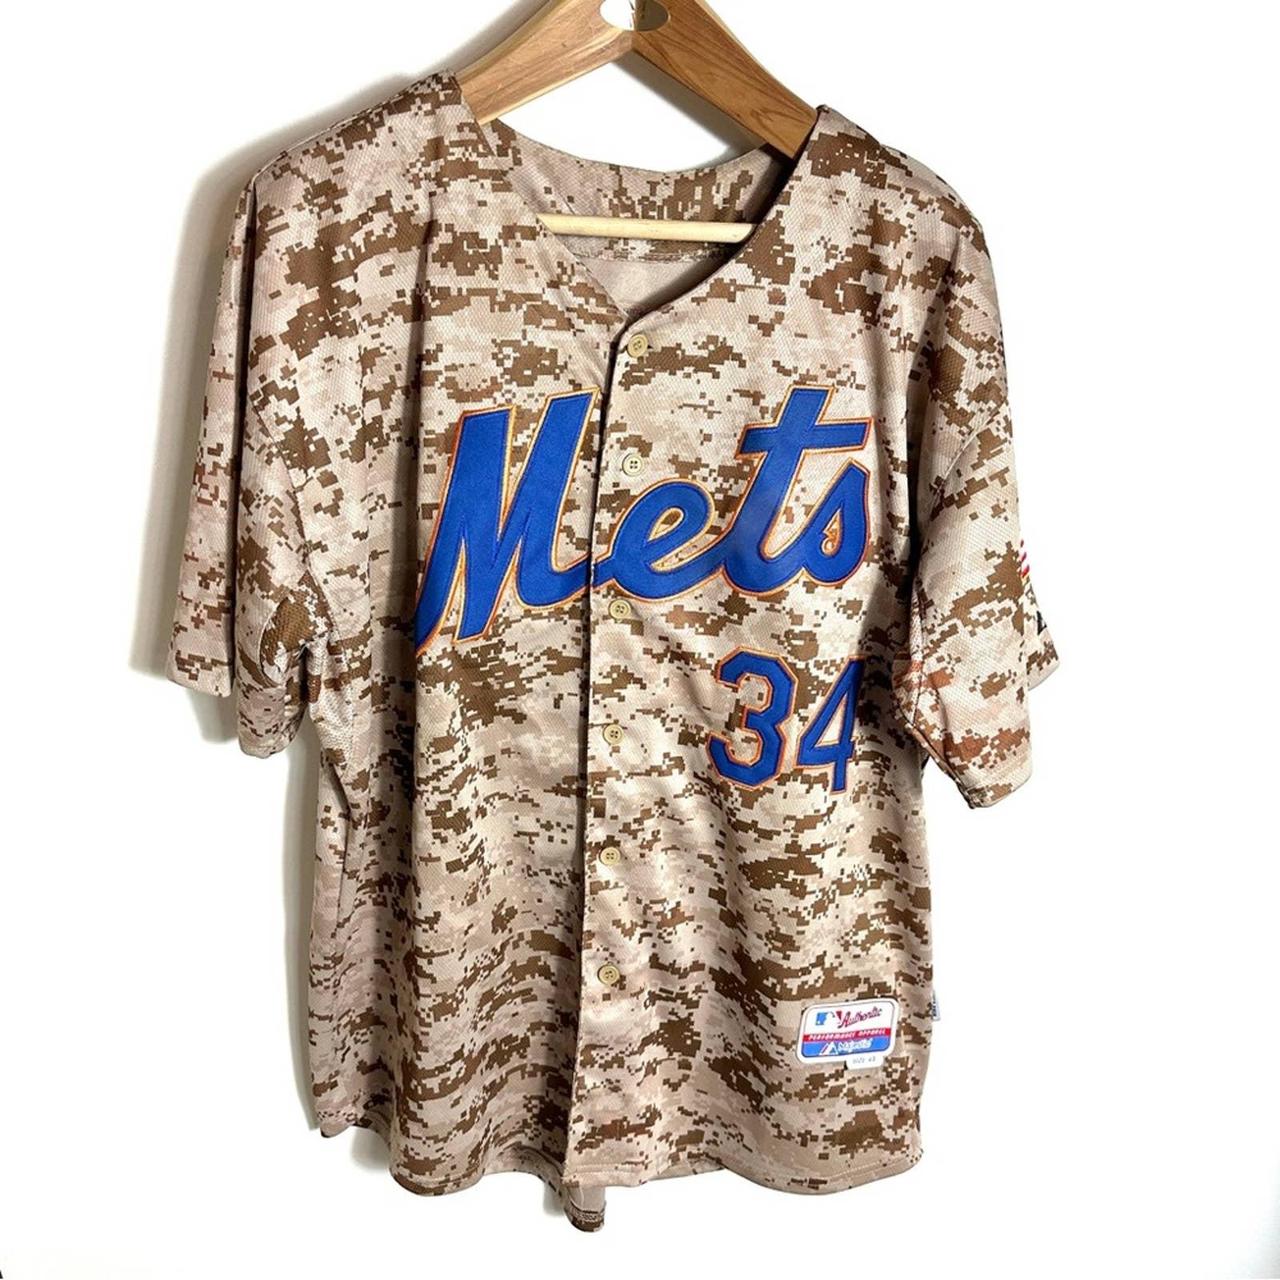 Authentic New York Mets Majestic size 48 XL Cool - Depop